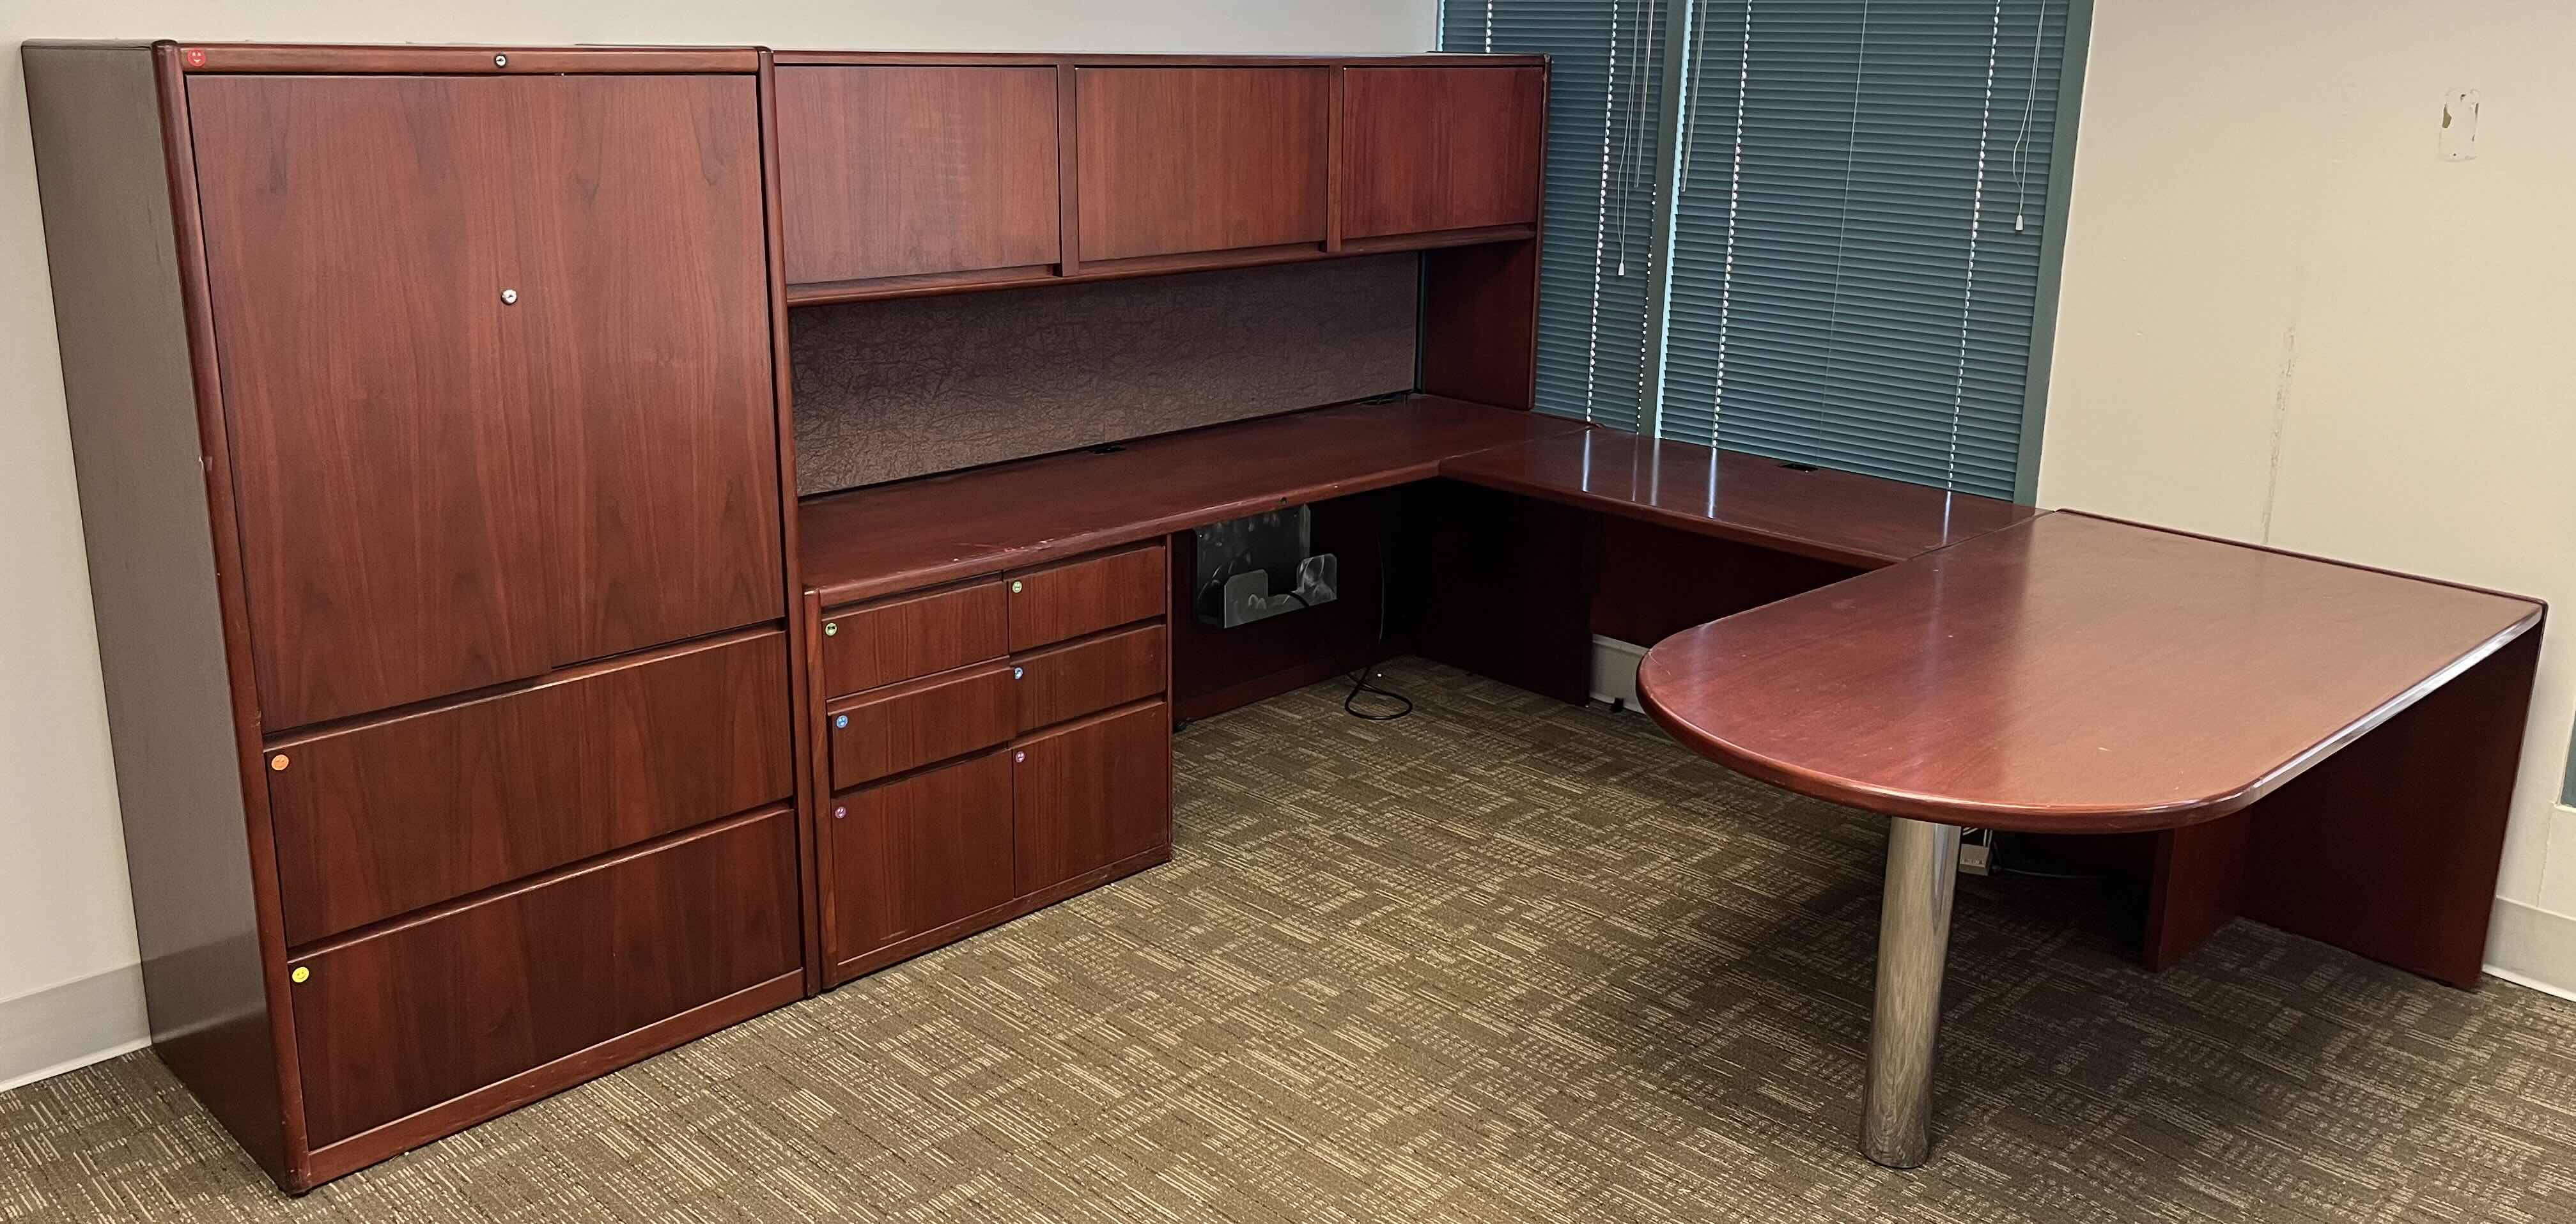 Photo 1 of STEELCASE CHERRY FINISH SOLID WOOD U SHAPE 8 DRAWER OFFICE DESK W BUILT IN CABINET 125” X 105” H64.5”